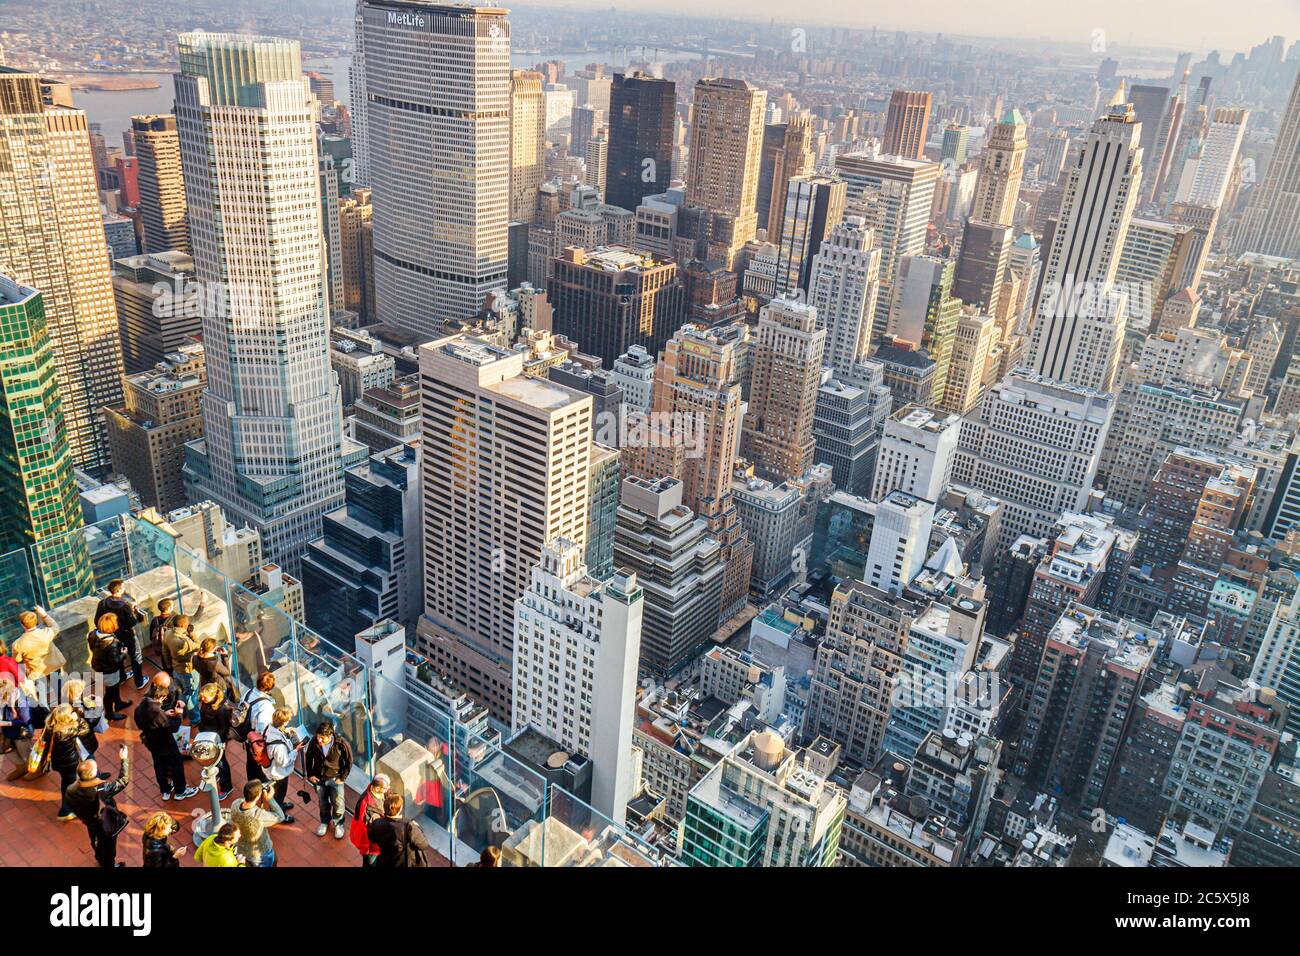 New York City, NYC NY Manhattan, Midtown, 6th Sixth Avenue of the Americas, Rockefeller Center, Top of the Rock Observation Deckskyline, grattacieli, buildin Foto Stock